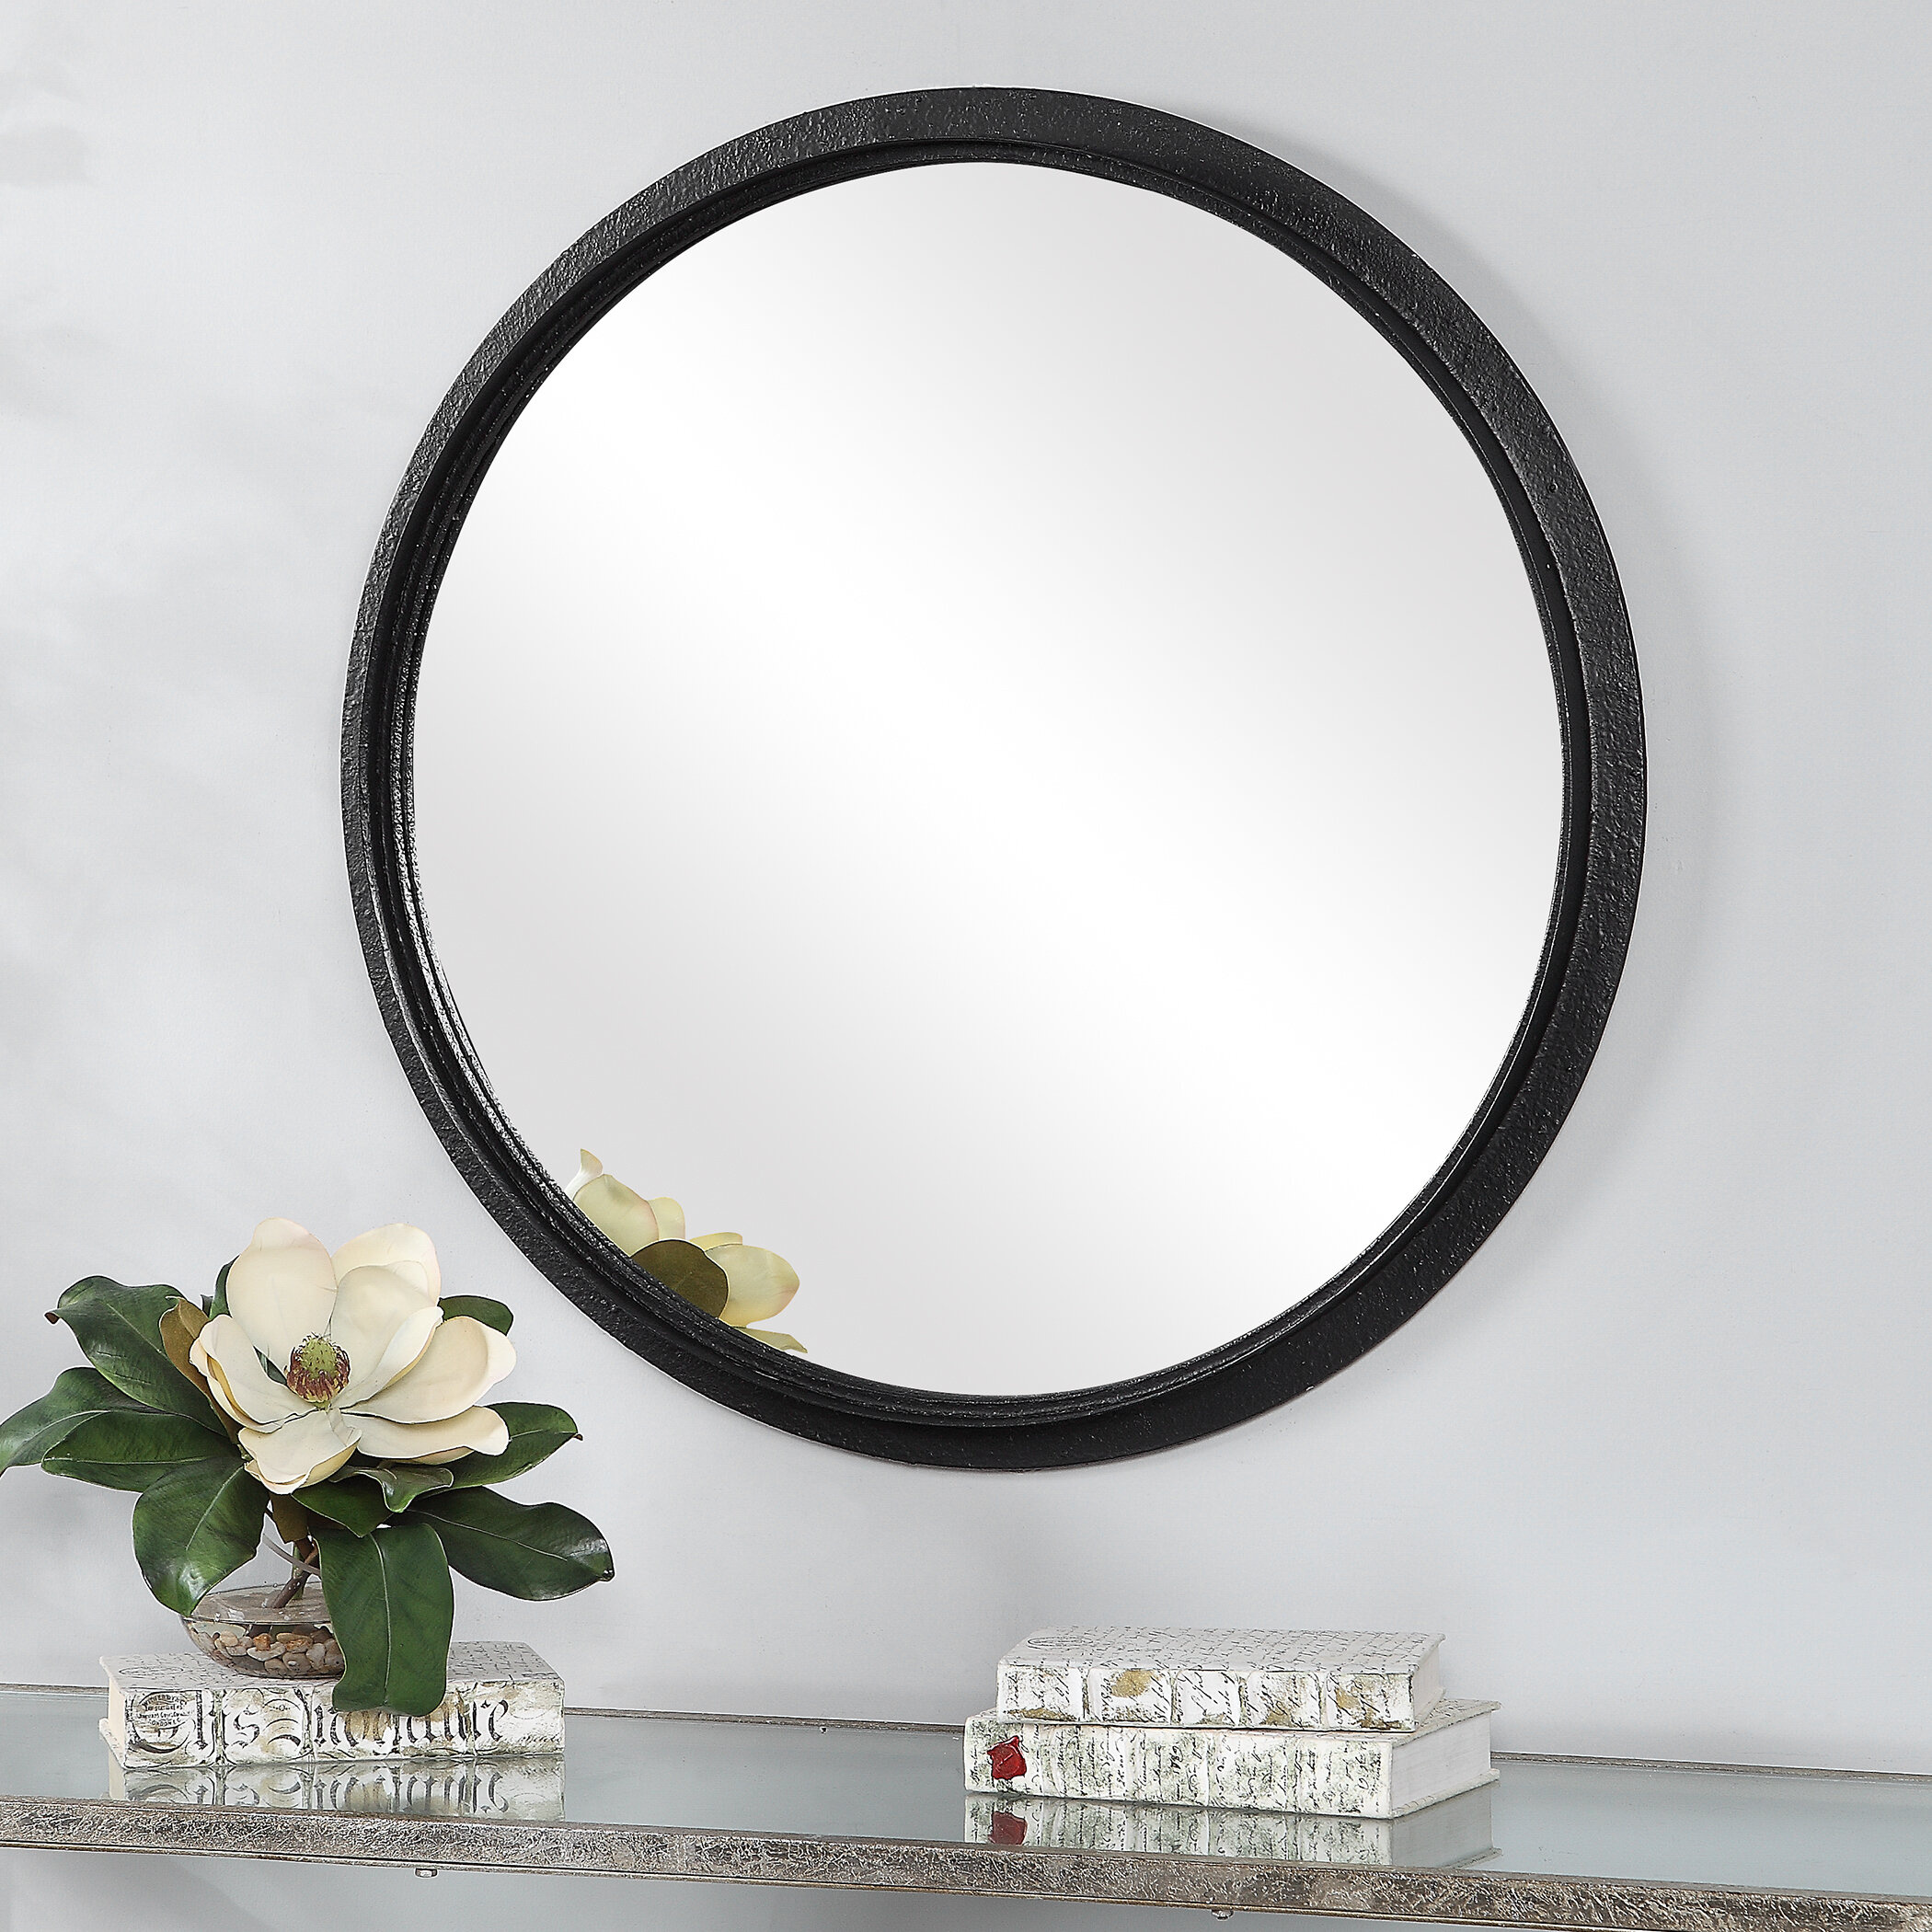 Mirror: A smooth surface made of glass with reflective material painted on the underside, Interior. 2100x2100 HD Background.